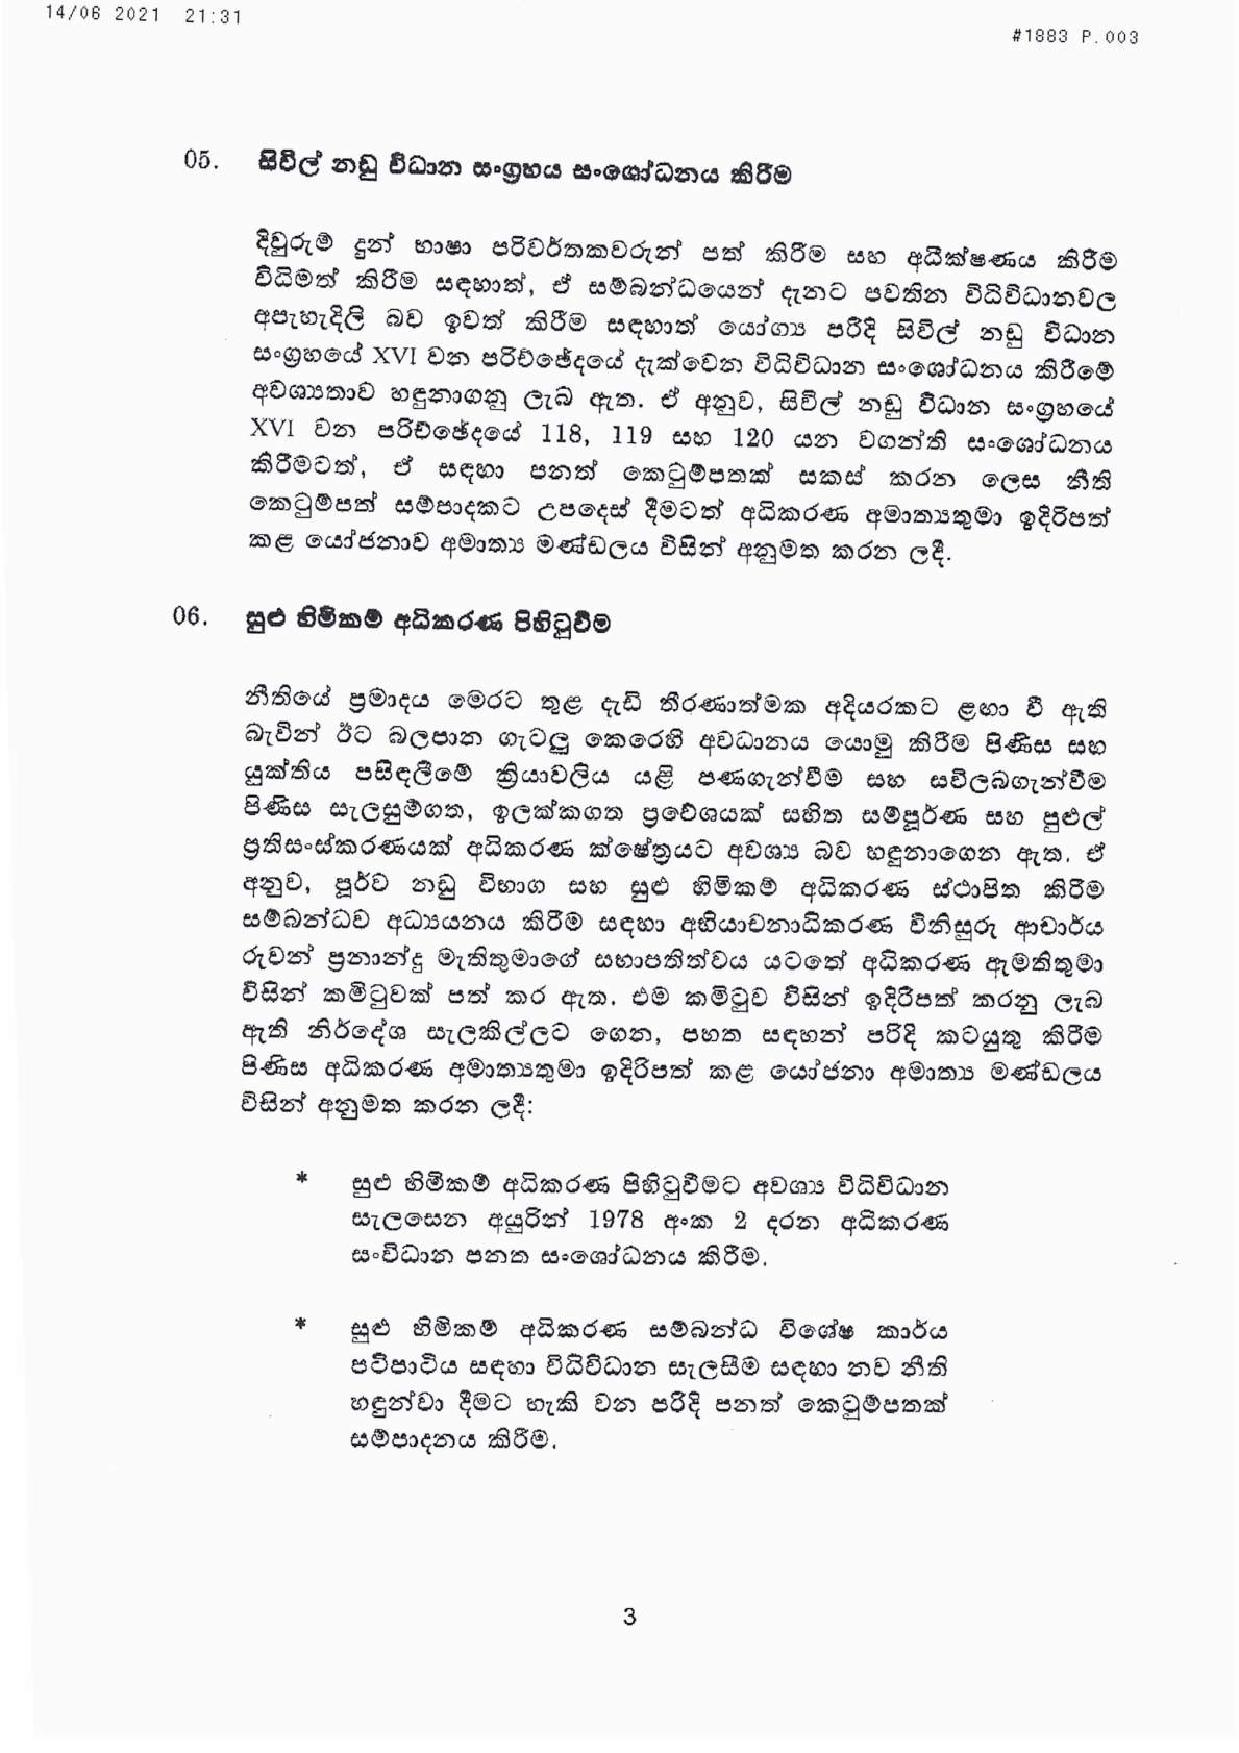 Cabinet Decisions on 14.06.2021 page 003